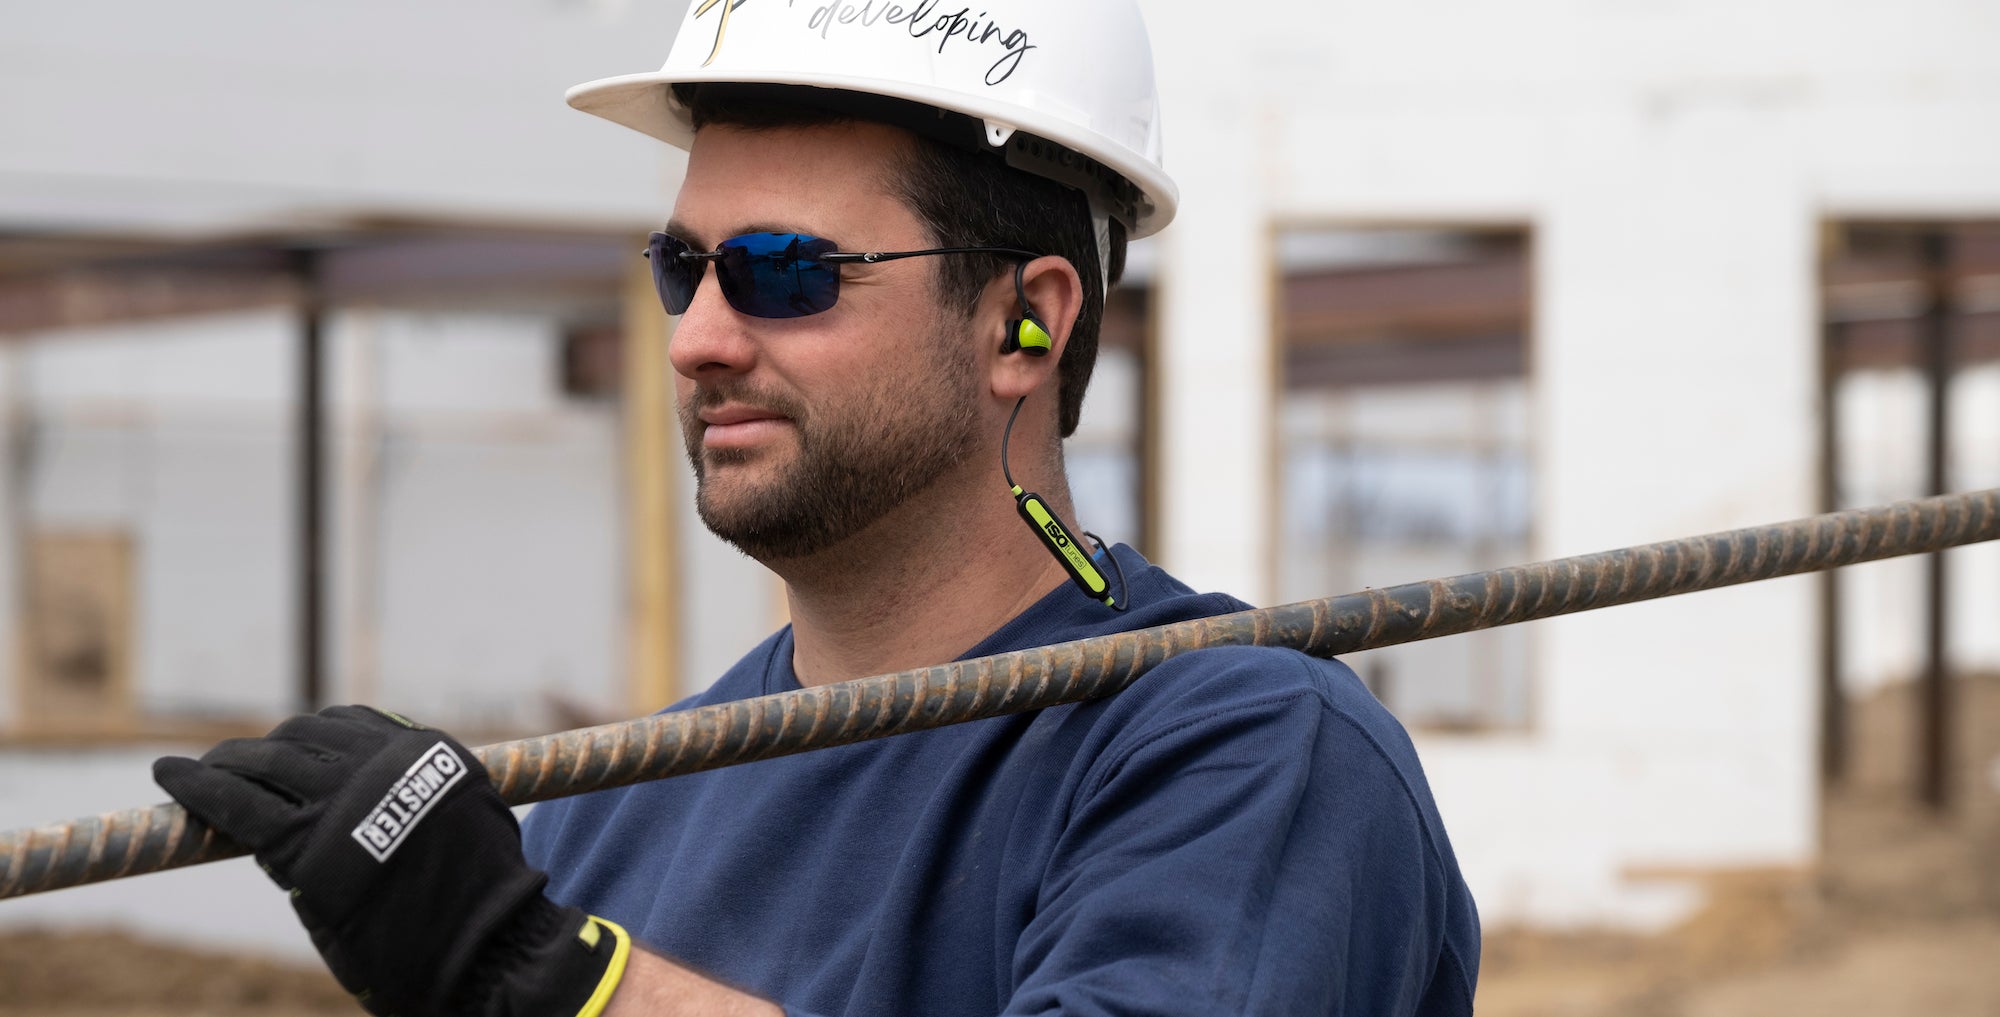 ISOtunes Hearing Protection for Construction Workers